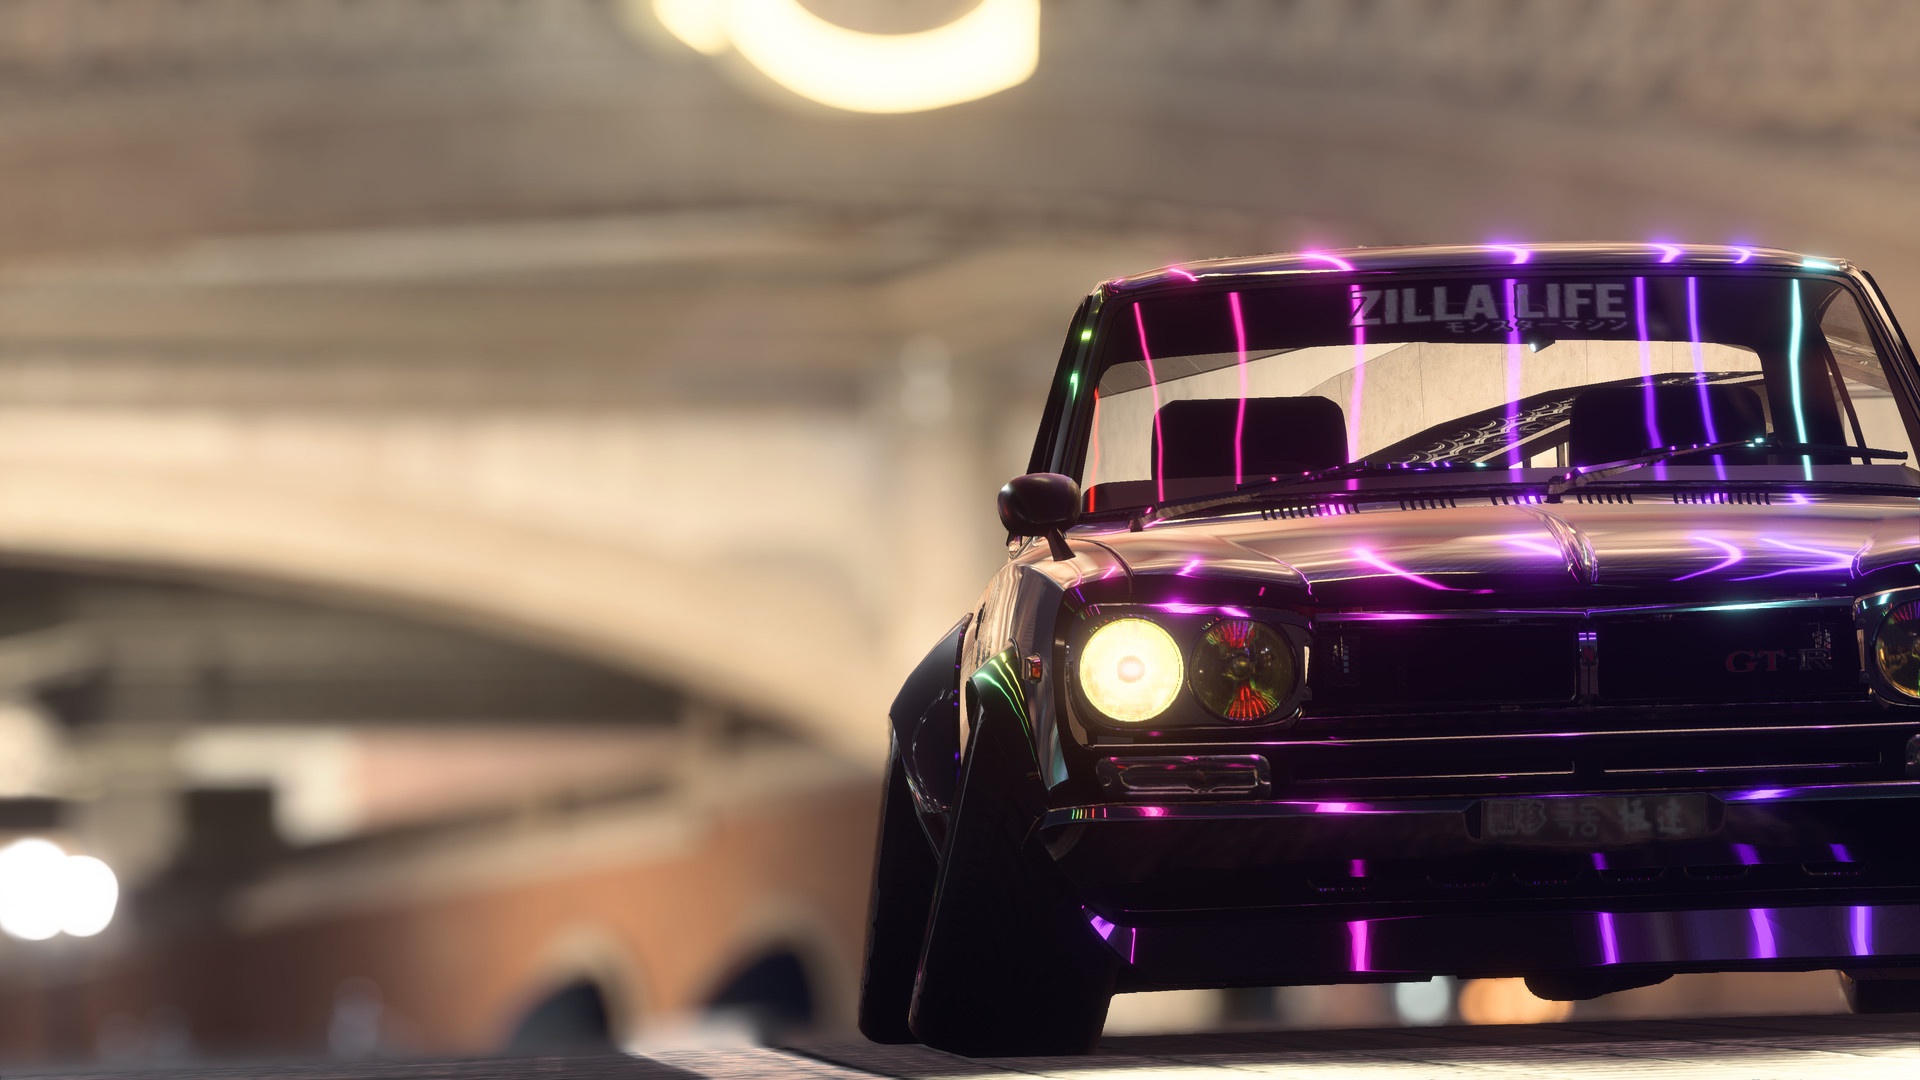 Video Games Need For Speed Payback Car Vehicle Skyline Gtr Need For Speed 1920x1080